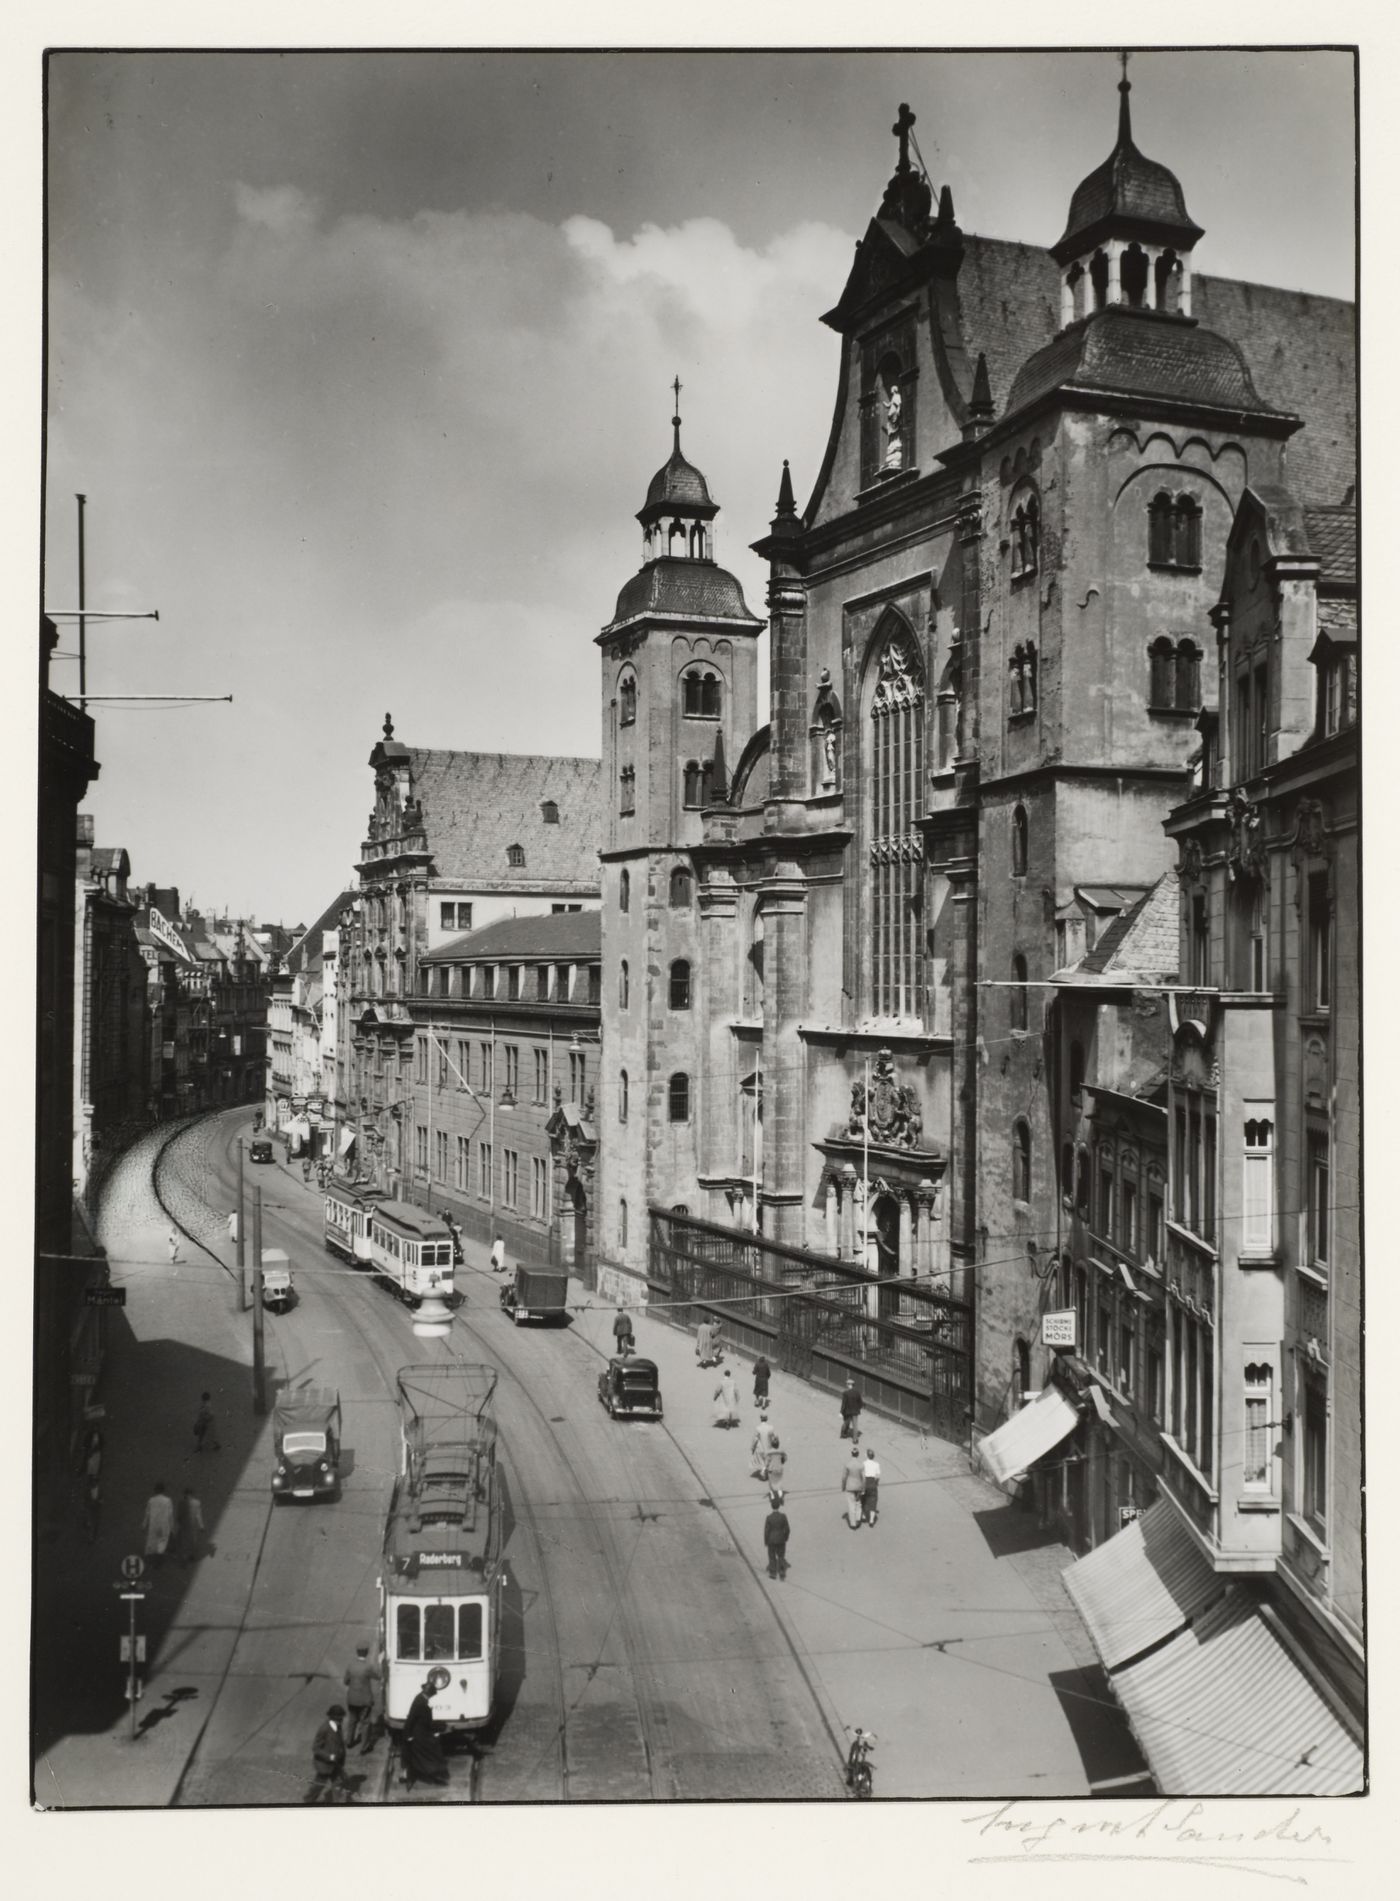 View along Marzellenstrasse with exterior of St. Maria Himmelfahrt Church, Cologne, Germany